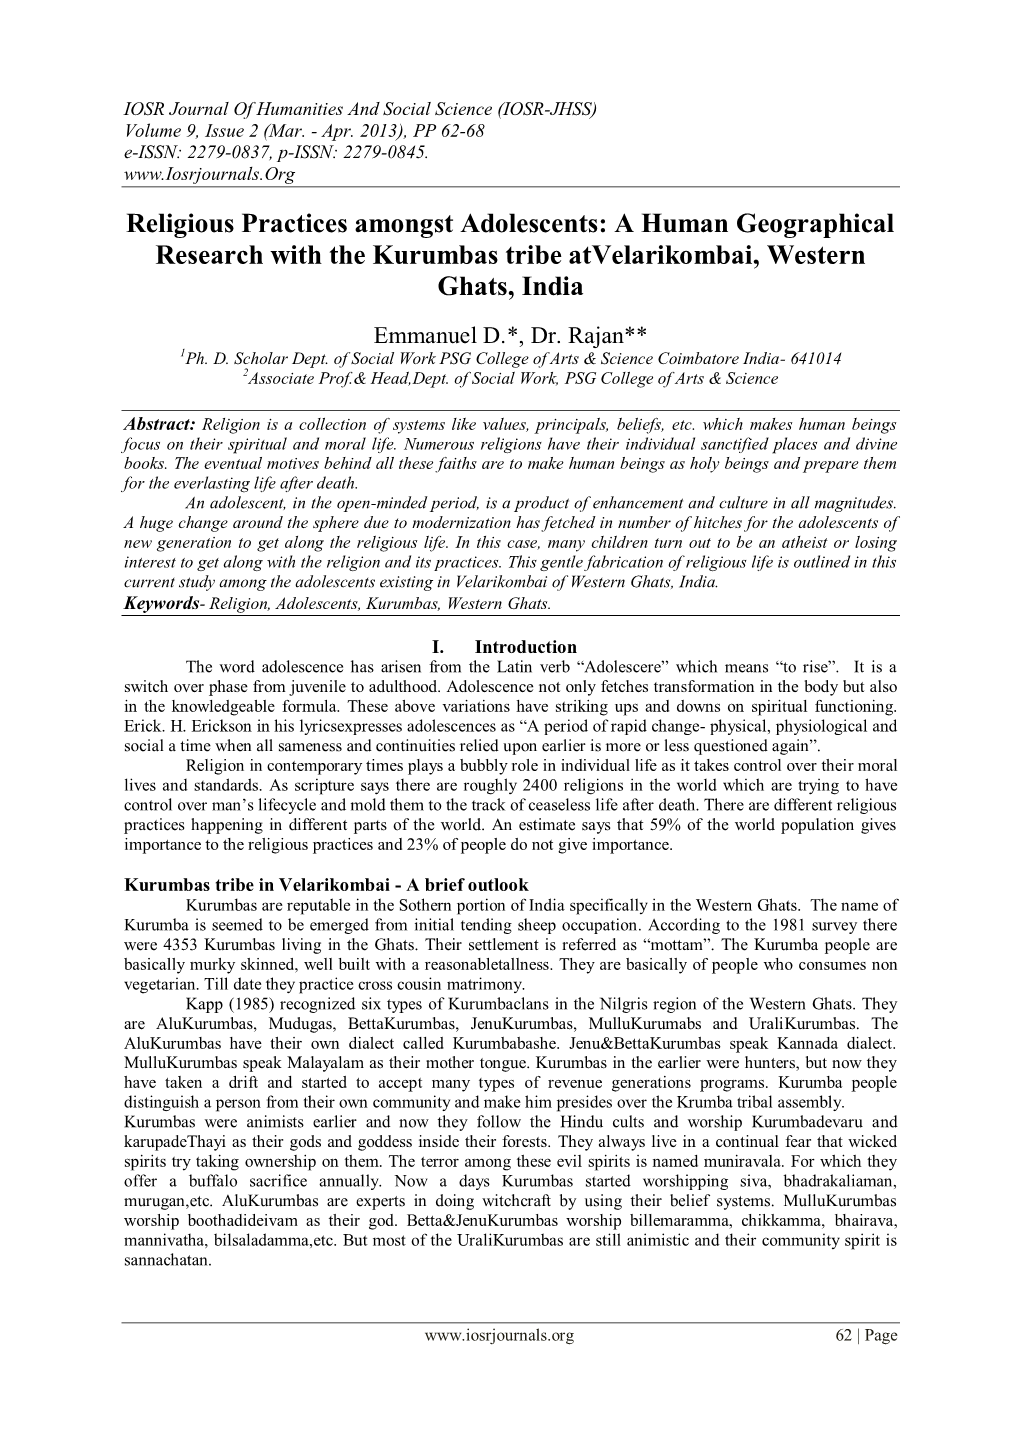 Religious Practices Amongst Adolescents: a Human Geographical Research with the Kurumbas Tribe Atvelarikombai, Western Ghats, India